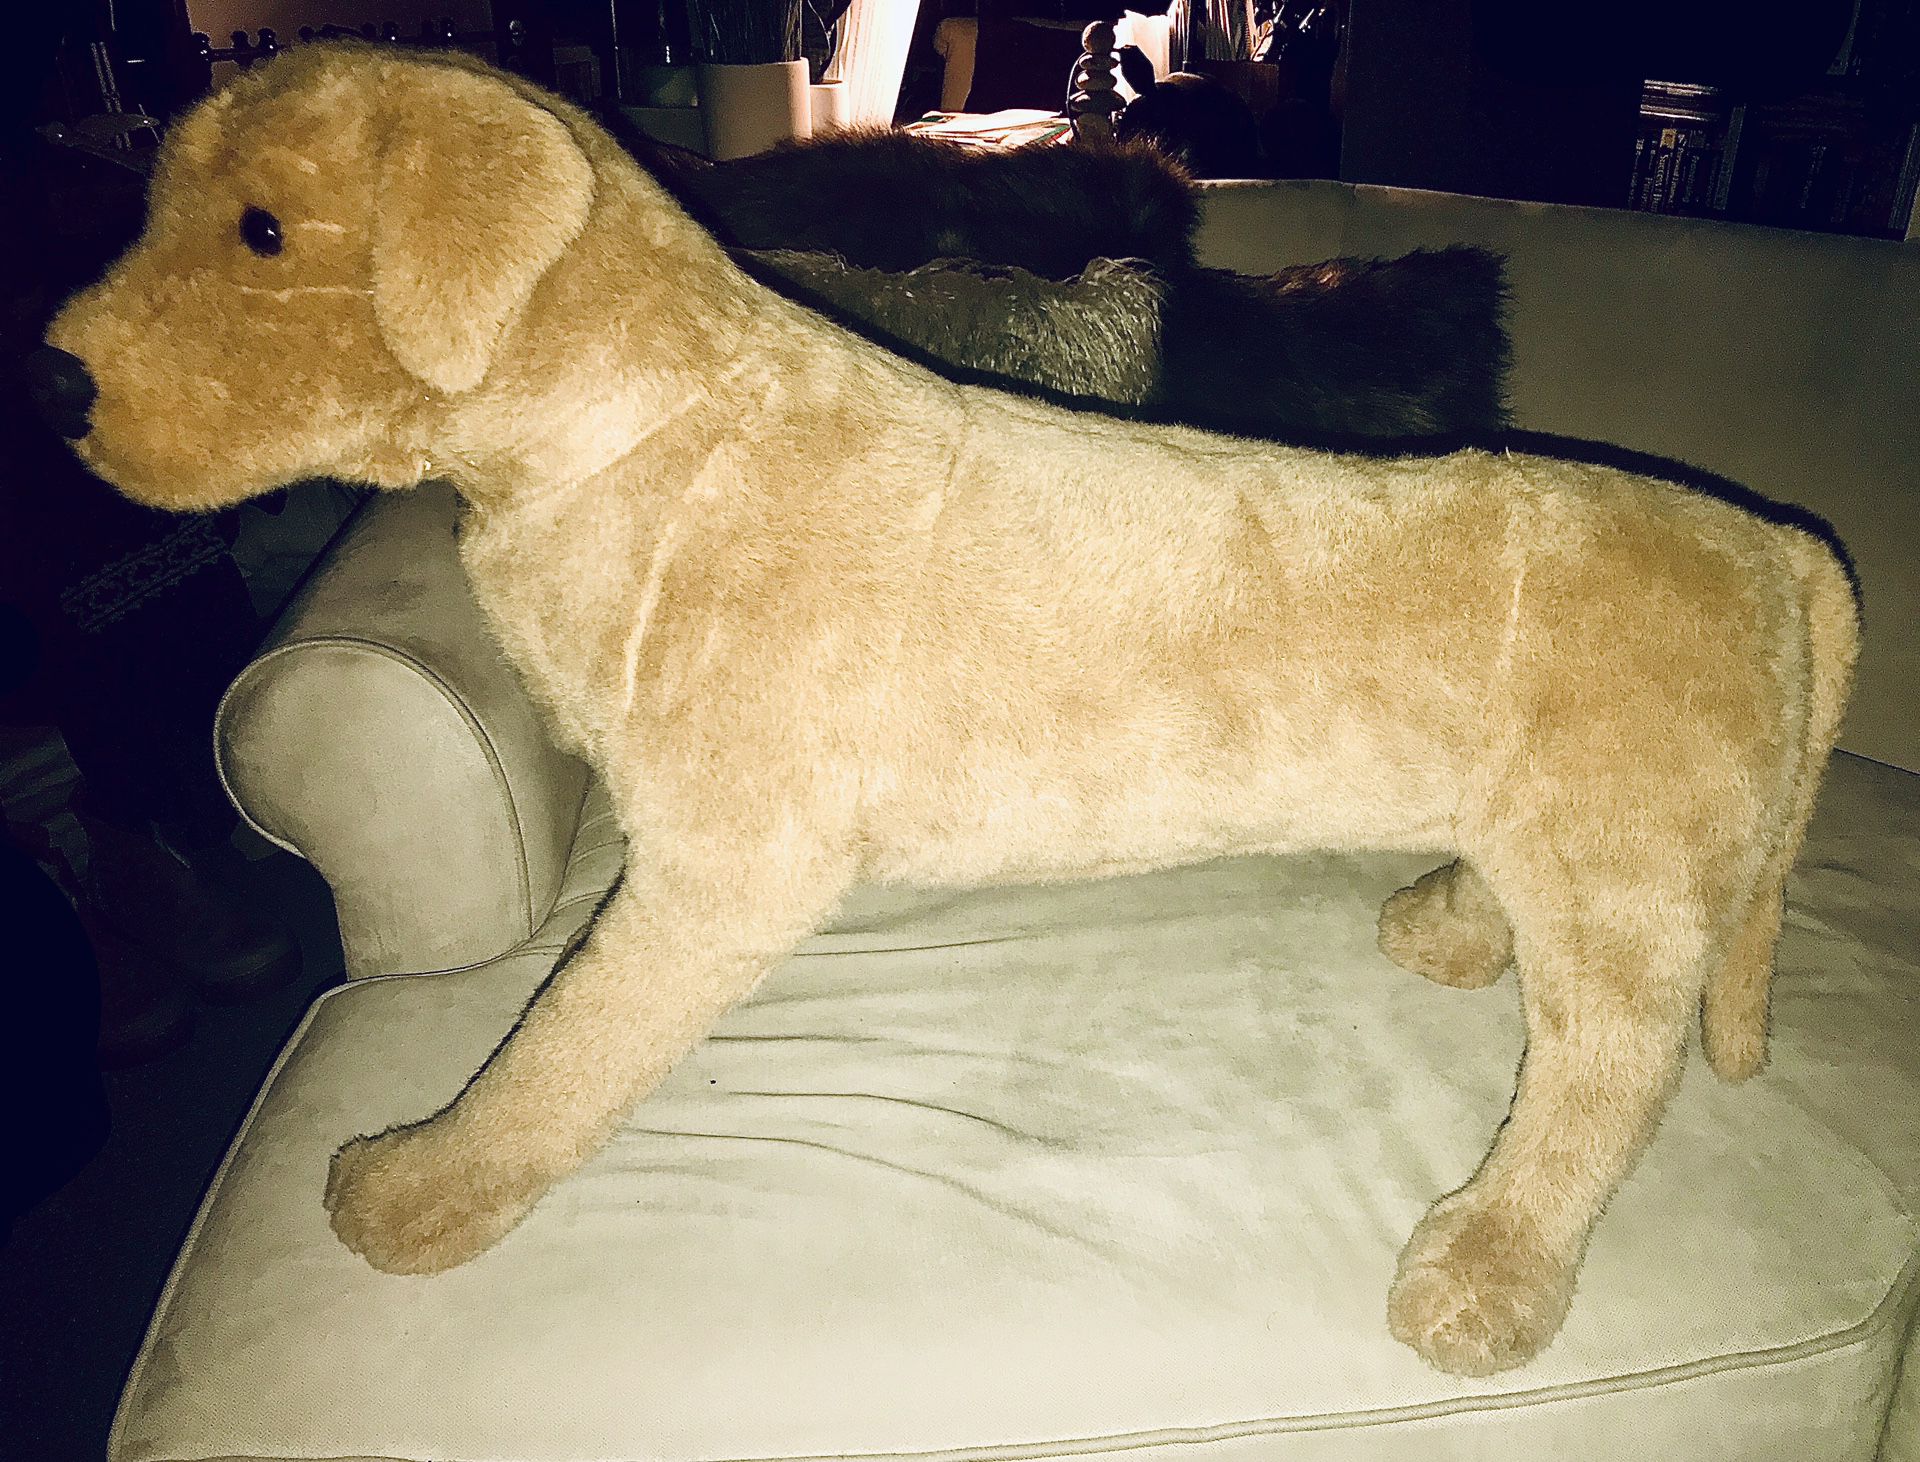 Very Large Stuffed Dog; originally cost $120 from Macy’s